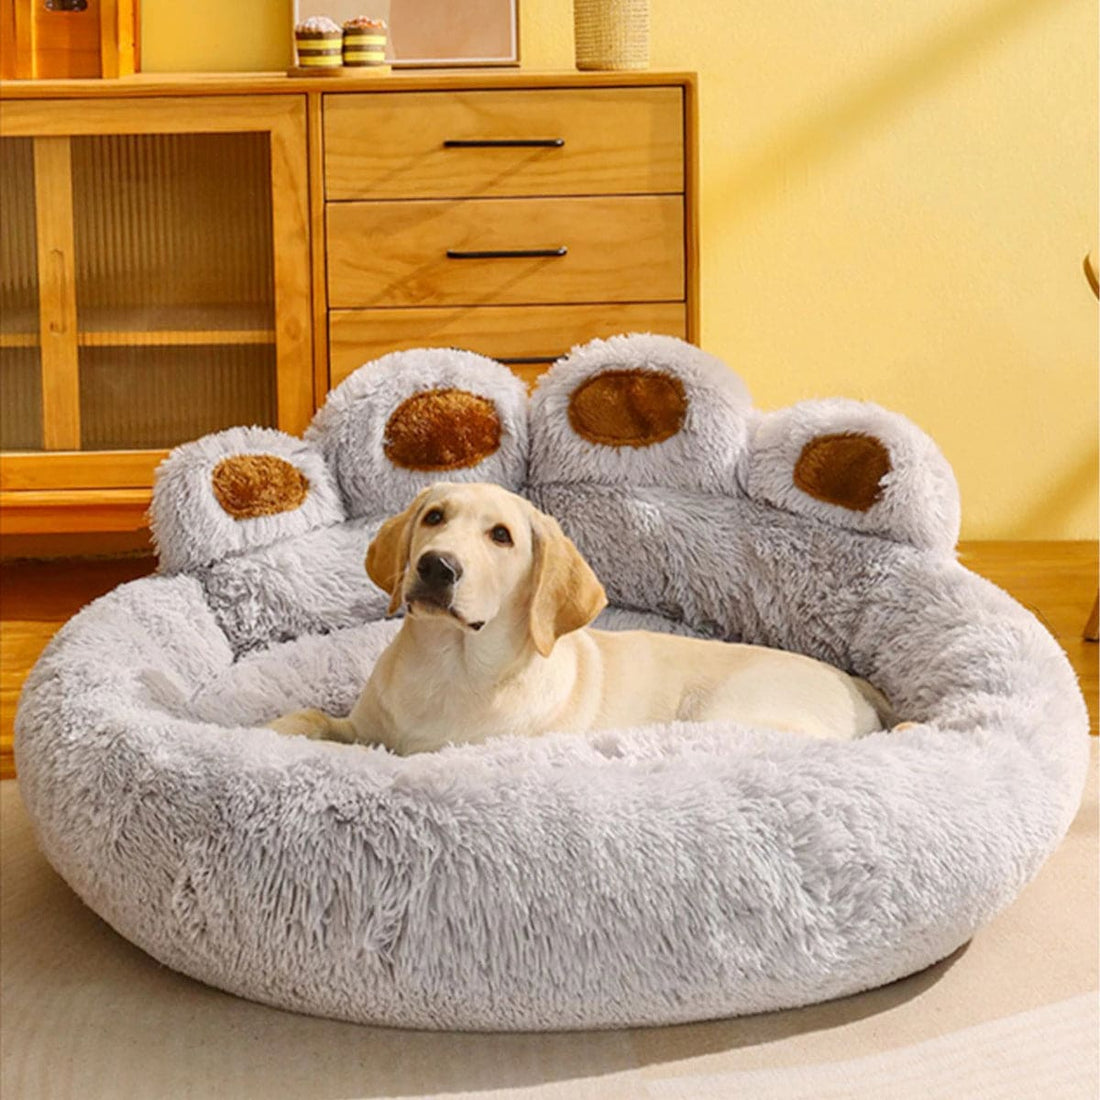 Fluffy Dog Bed Plush Kennel Accessories Pet Products Large Dogs Beds Bedding Sofa Basket Small Mat Cats Big Cushion Puppy Pets